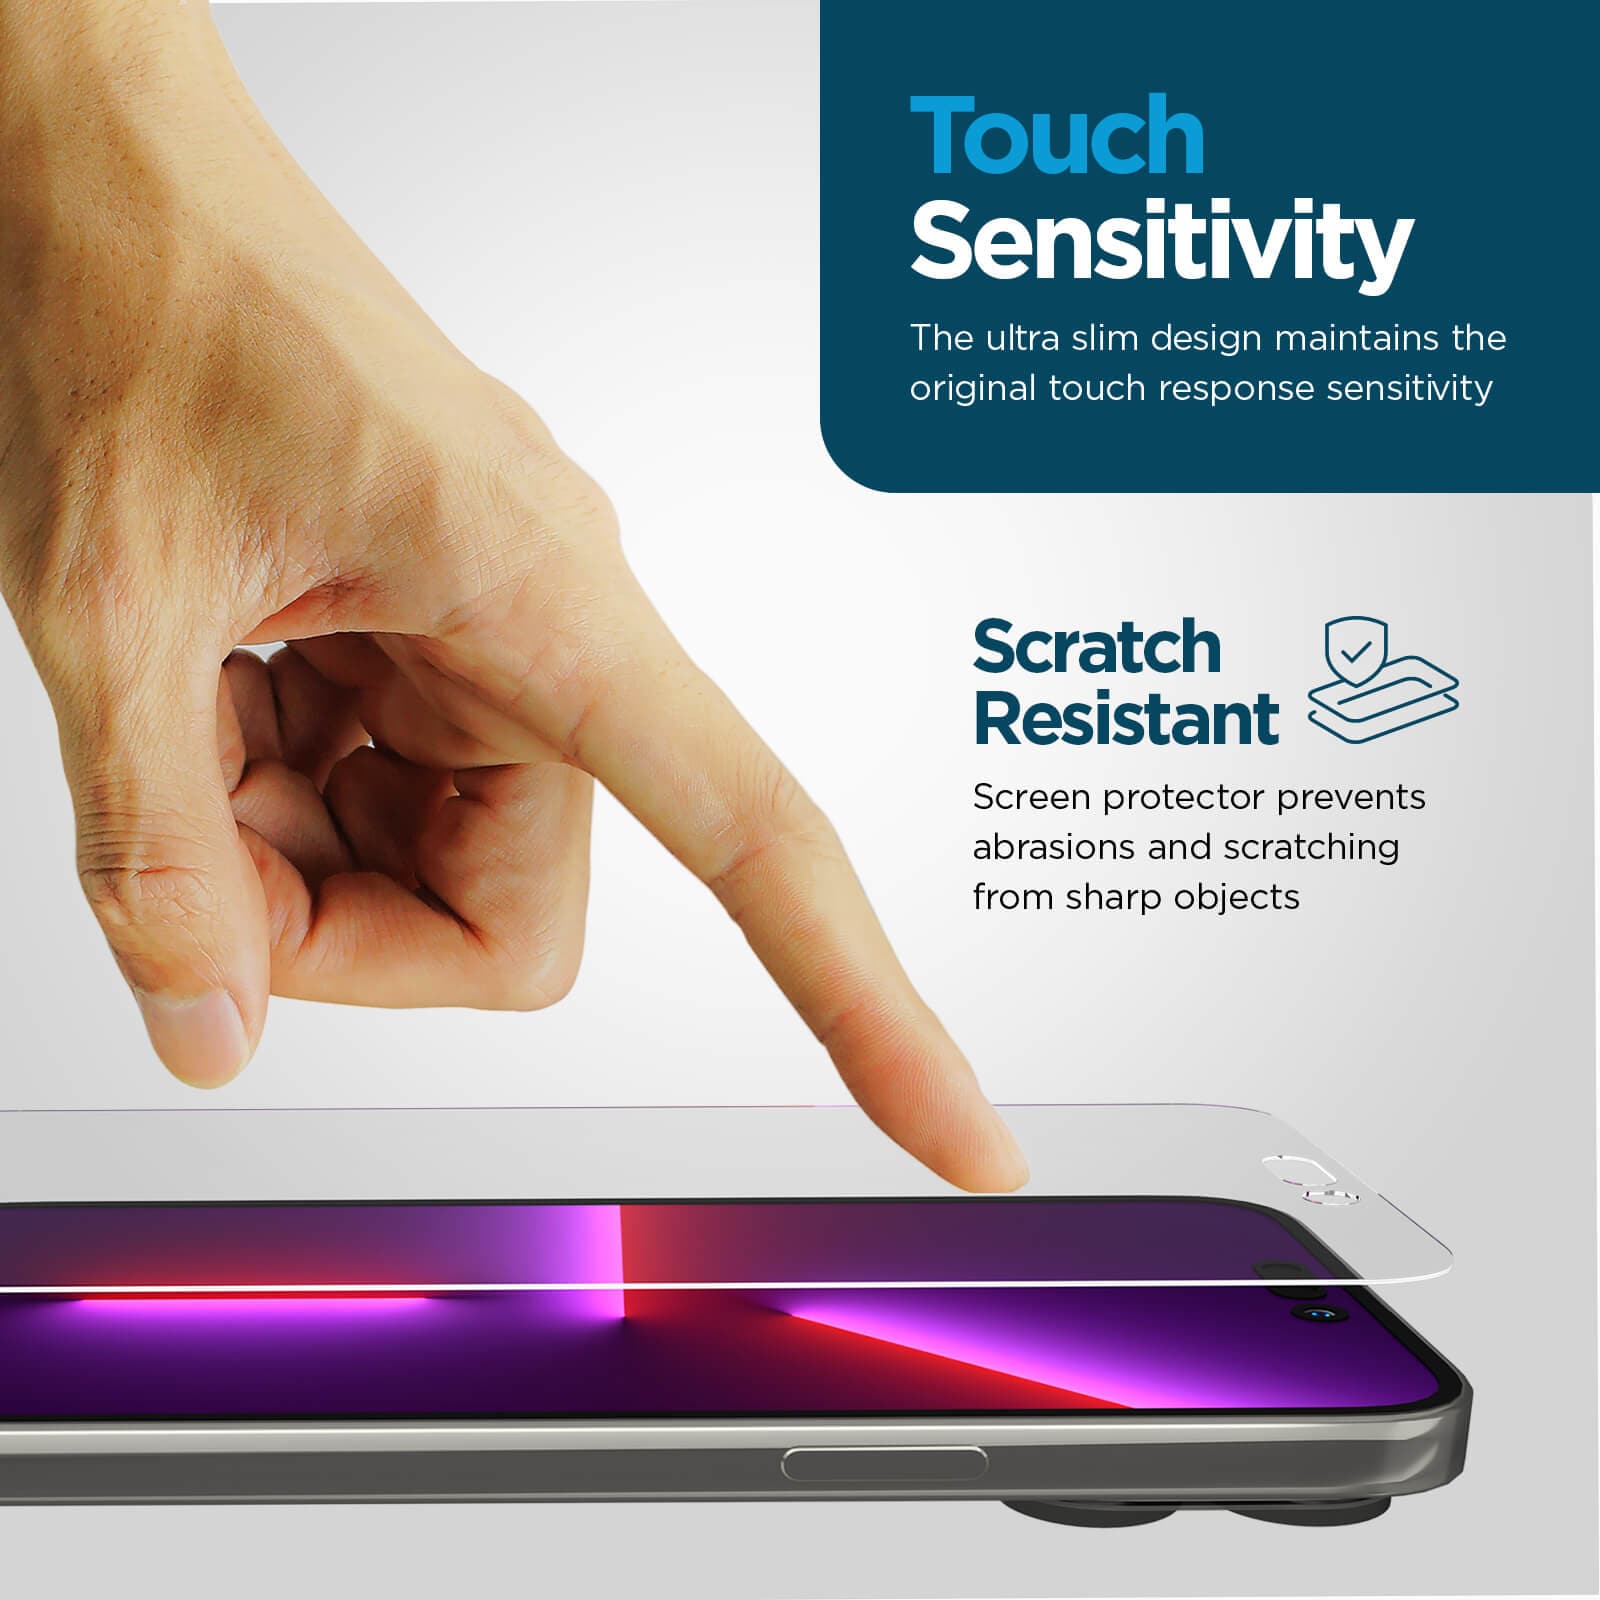 Touch sensitivity. the ultra slim design maintains the original touch response sensitivity. Scratch resistant screen protector prevents abrasions and scratching from sharp objects. color::Clear